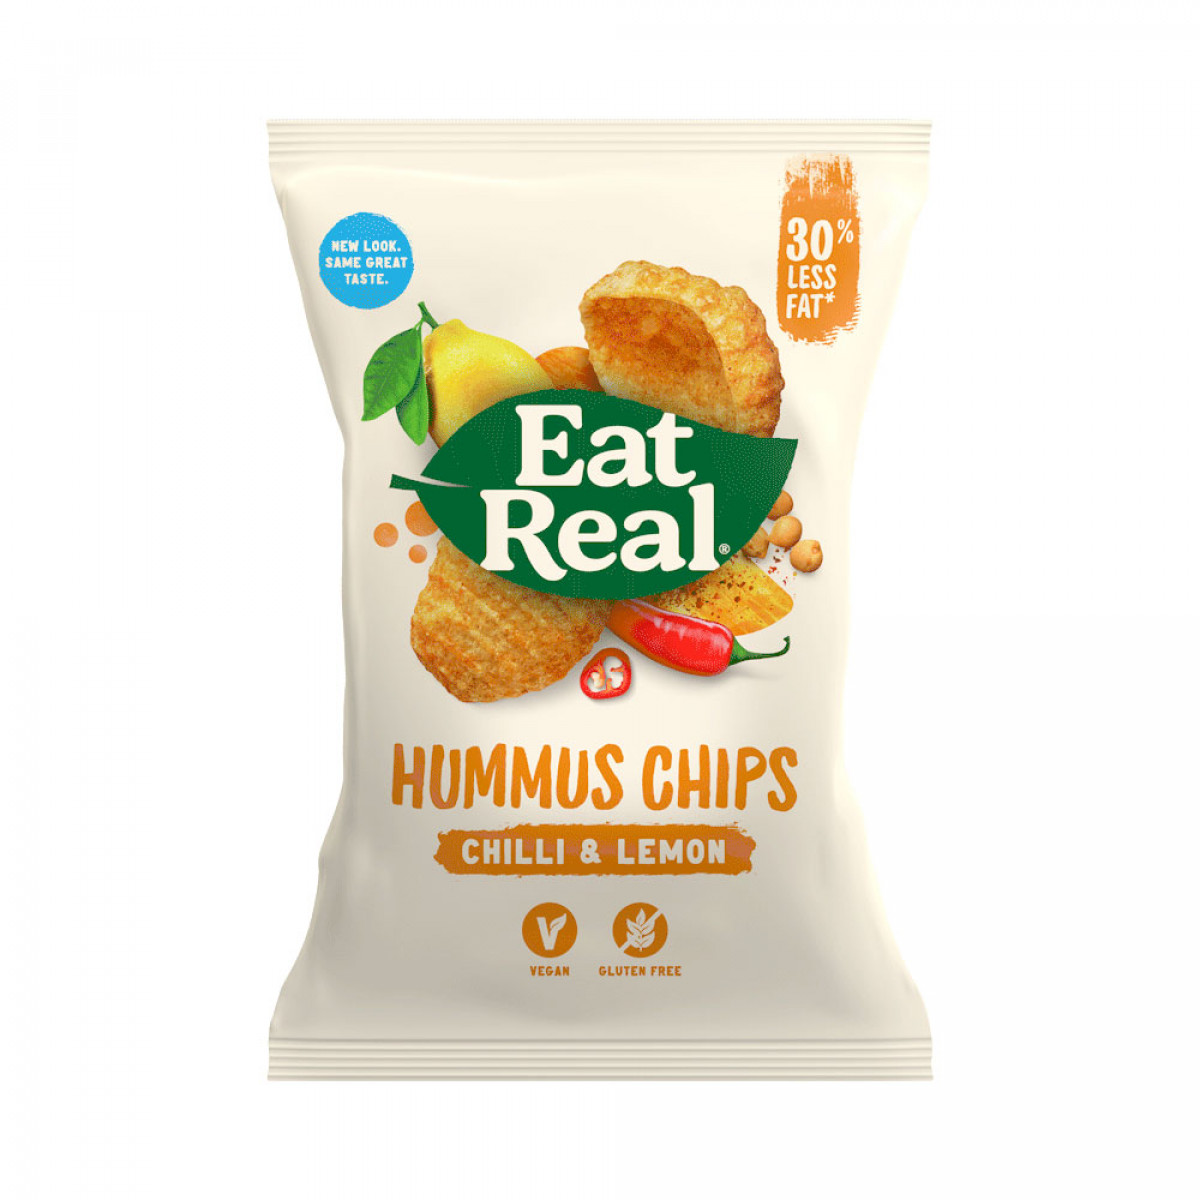 Product picture for Hummus Chips Chilli & Lemon